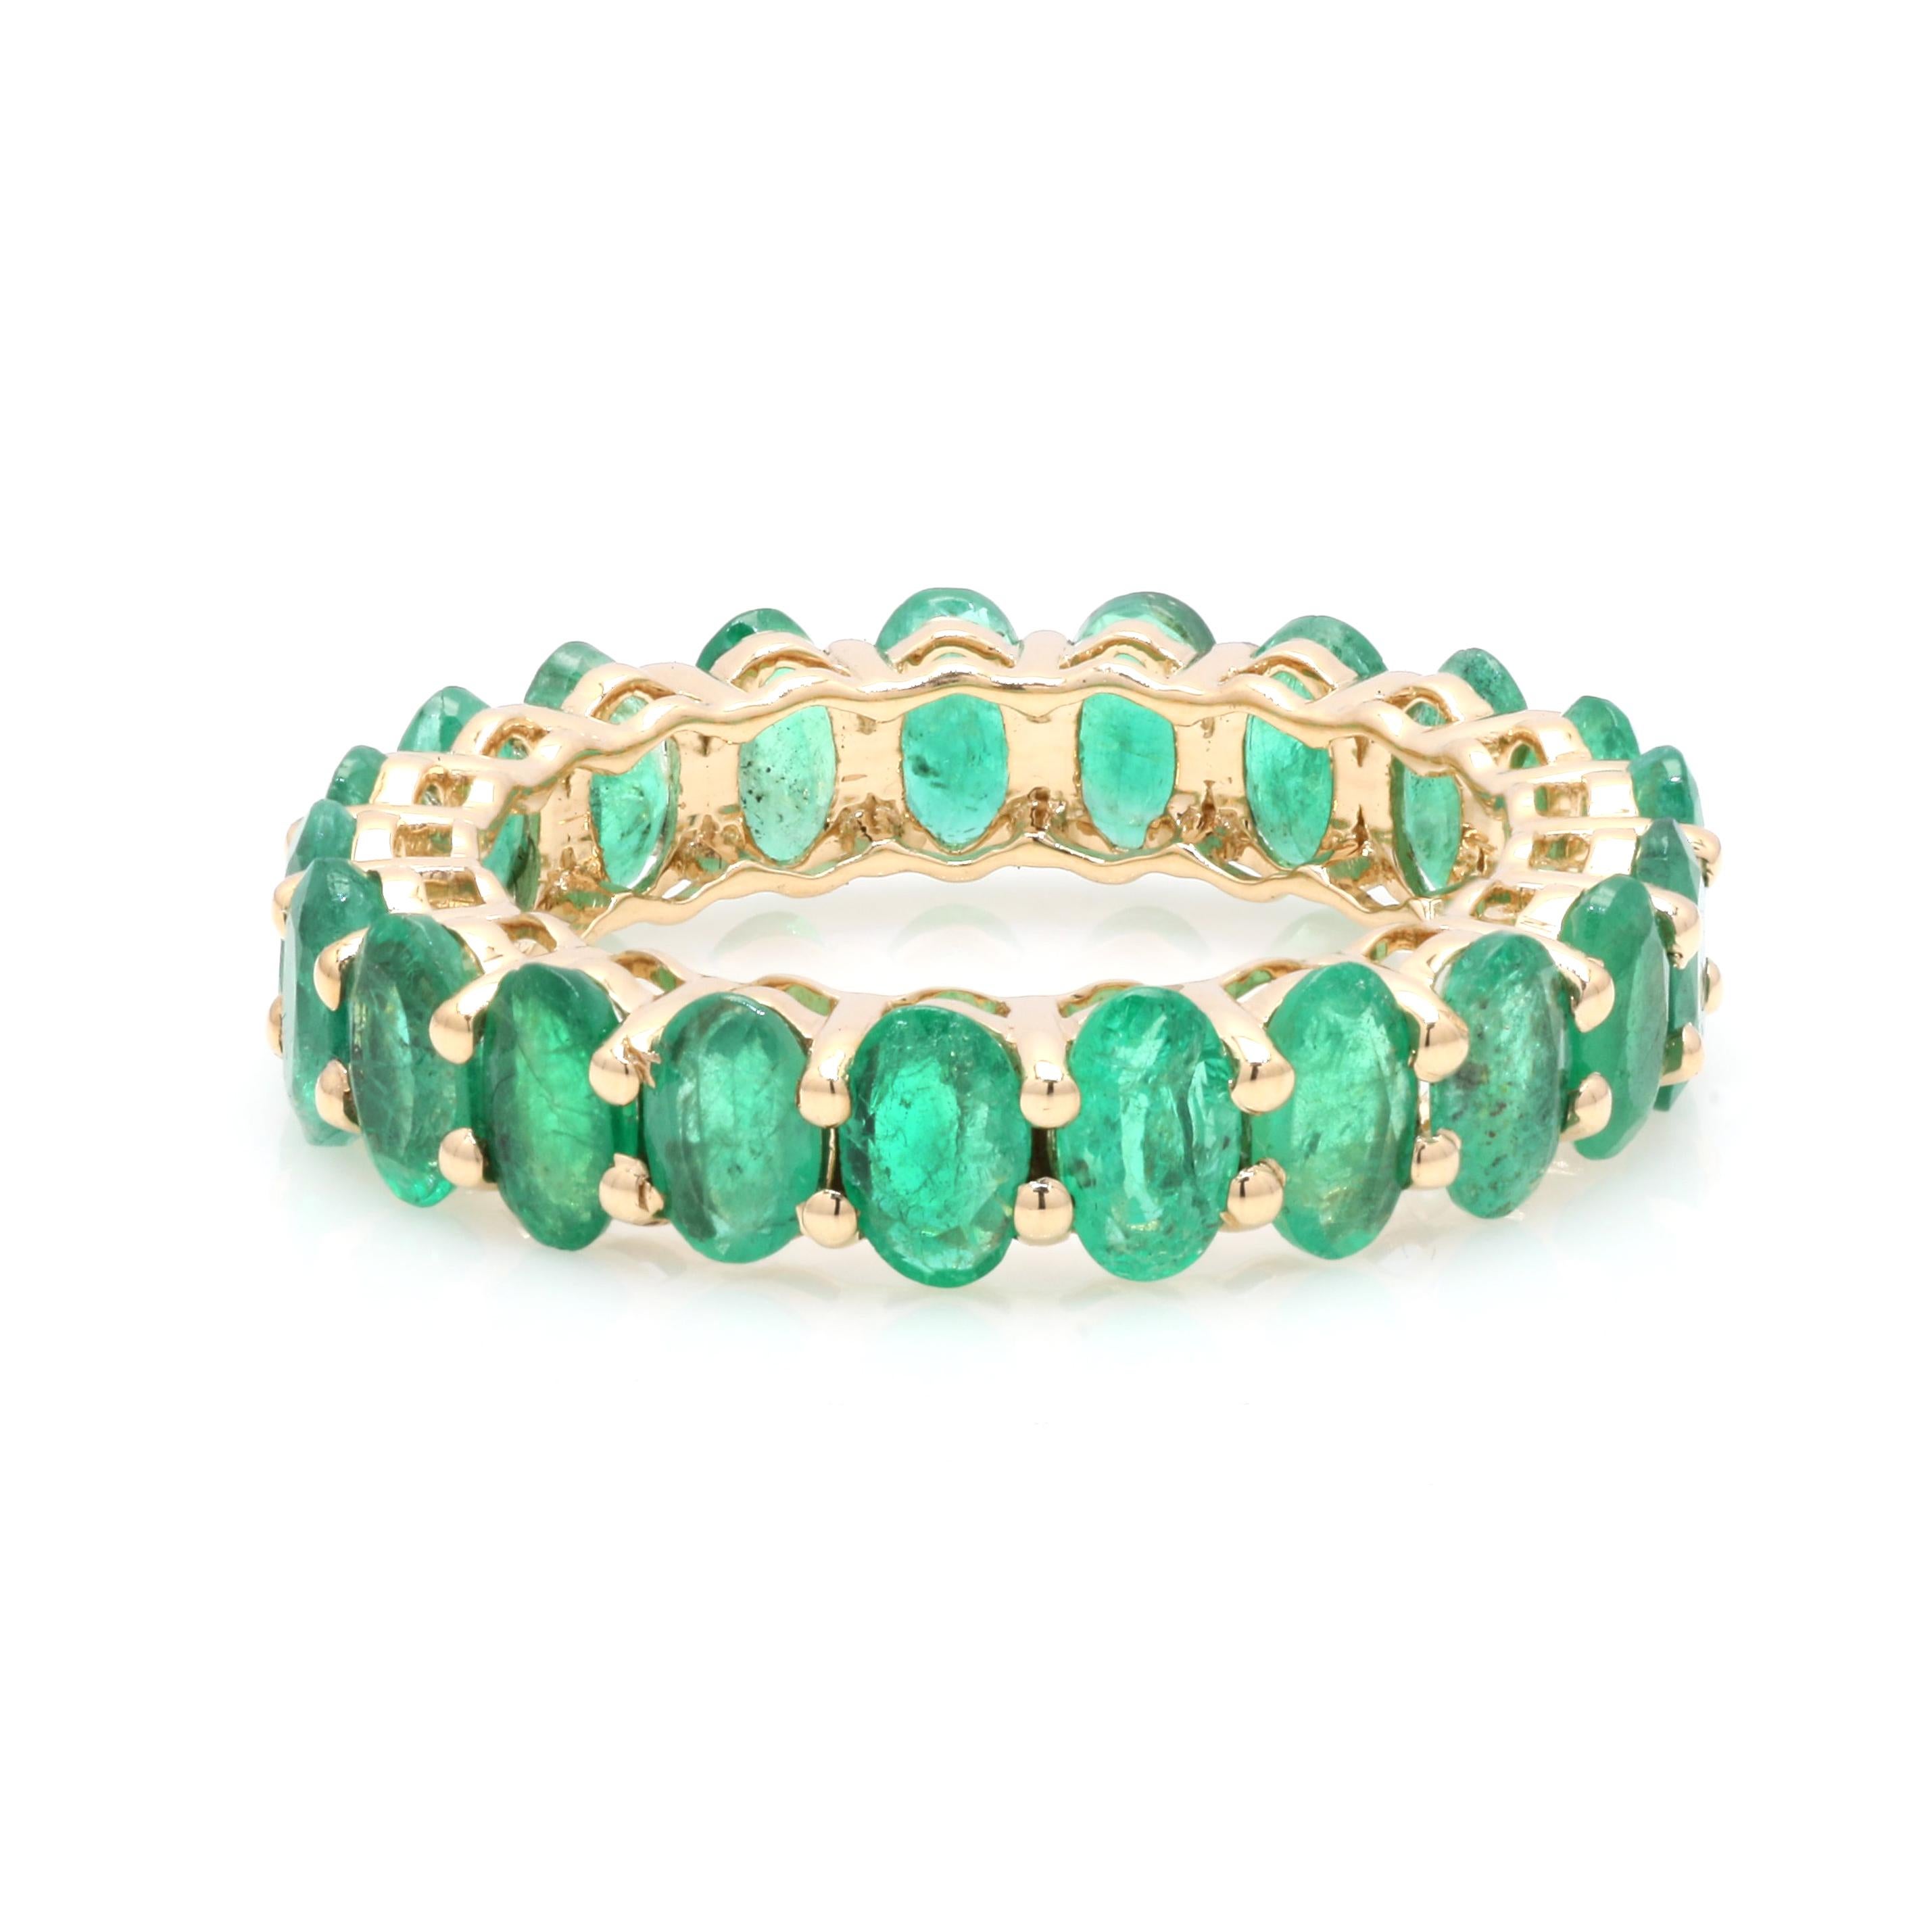 For Sale:  14 Karat Yellow Gold 4.63 ct Oval Cut Emerald Gemstone Eternity Band Ring 8